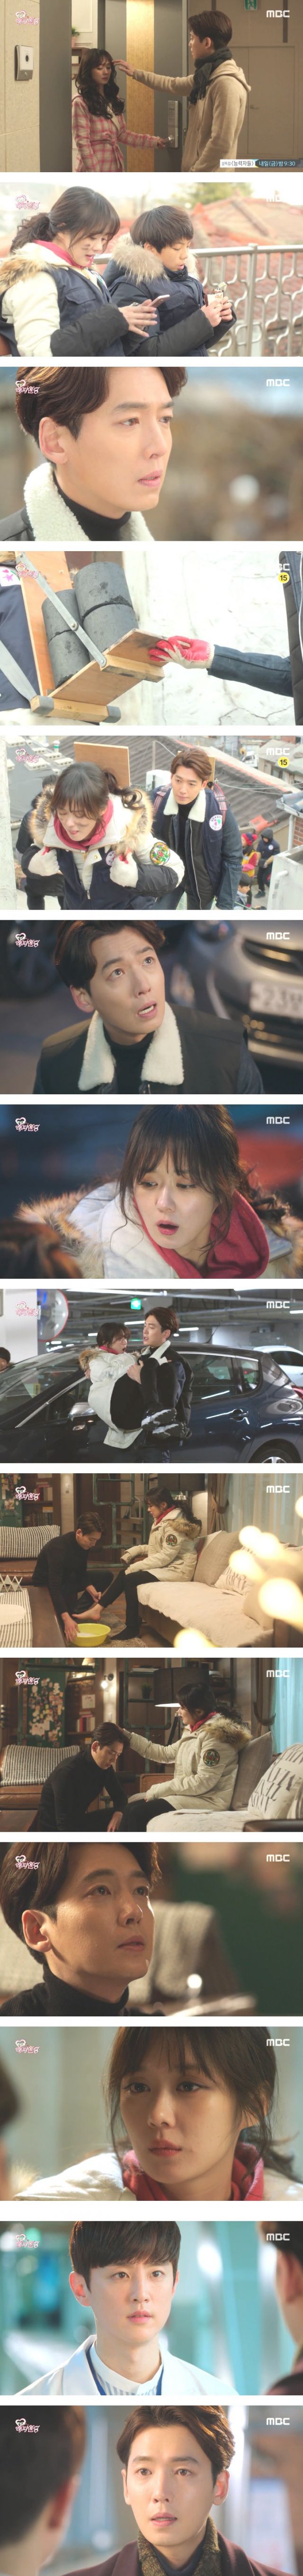 episode 6 captures for the Korean drama 'One More Happy Ending'